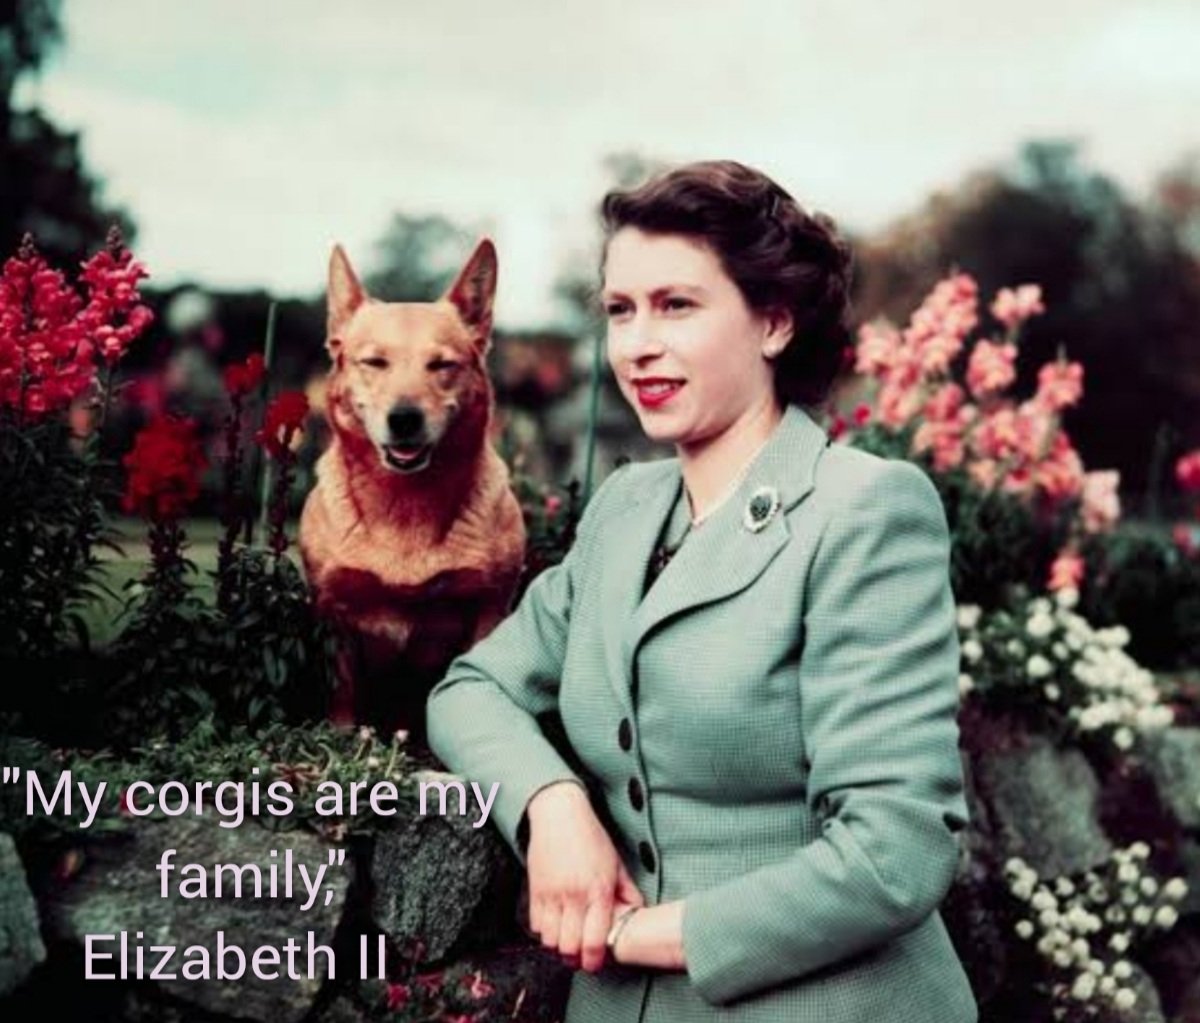 Queen Elizabeth II ❤❤ Words of Wisdom❤Our late Queen once again had it right🐕🐈‍⬛Our pets are Family❤
#QueenElizabethII #InternationalDogDay #Monarchy #Wisdom #ForTheLoveofDogs ❤ #ForTheLoveofCats 🐈‍⬛💕 #Jo_March62